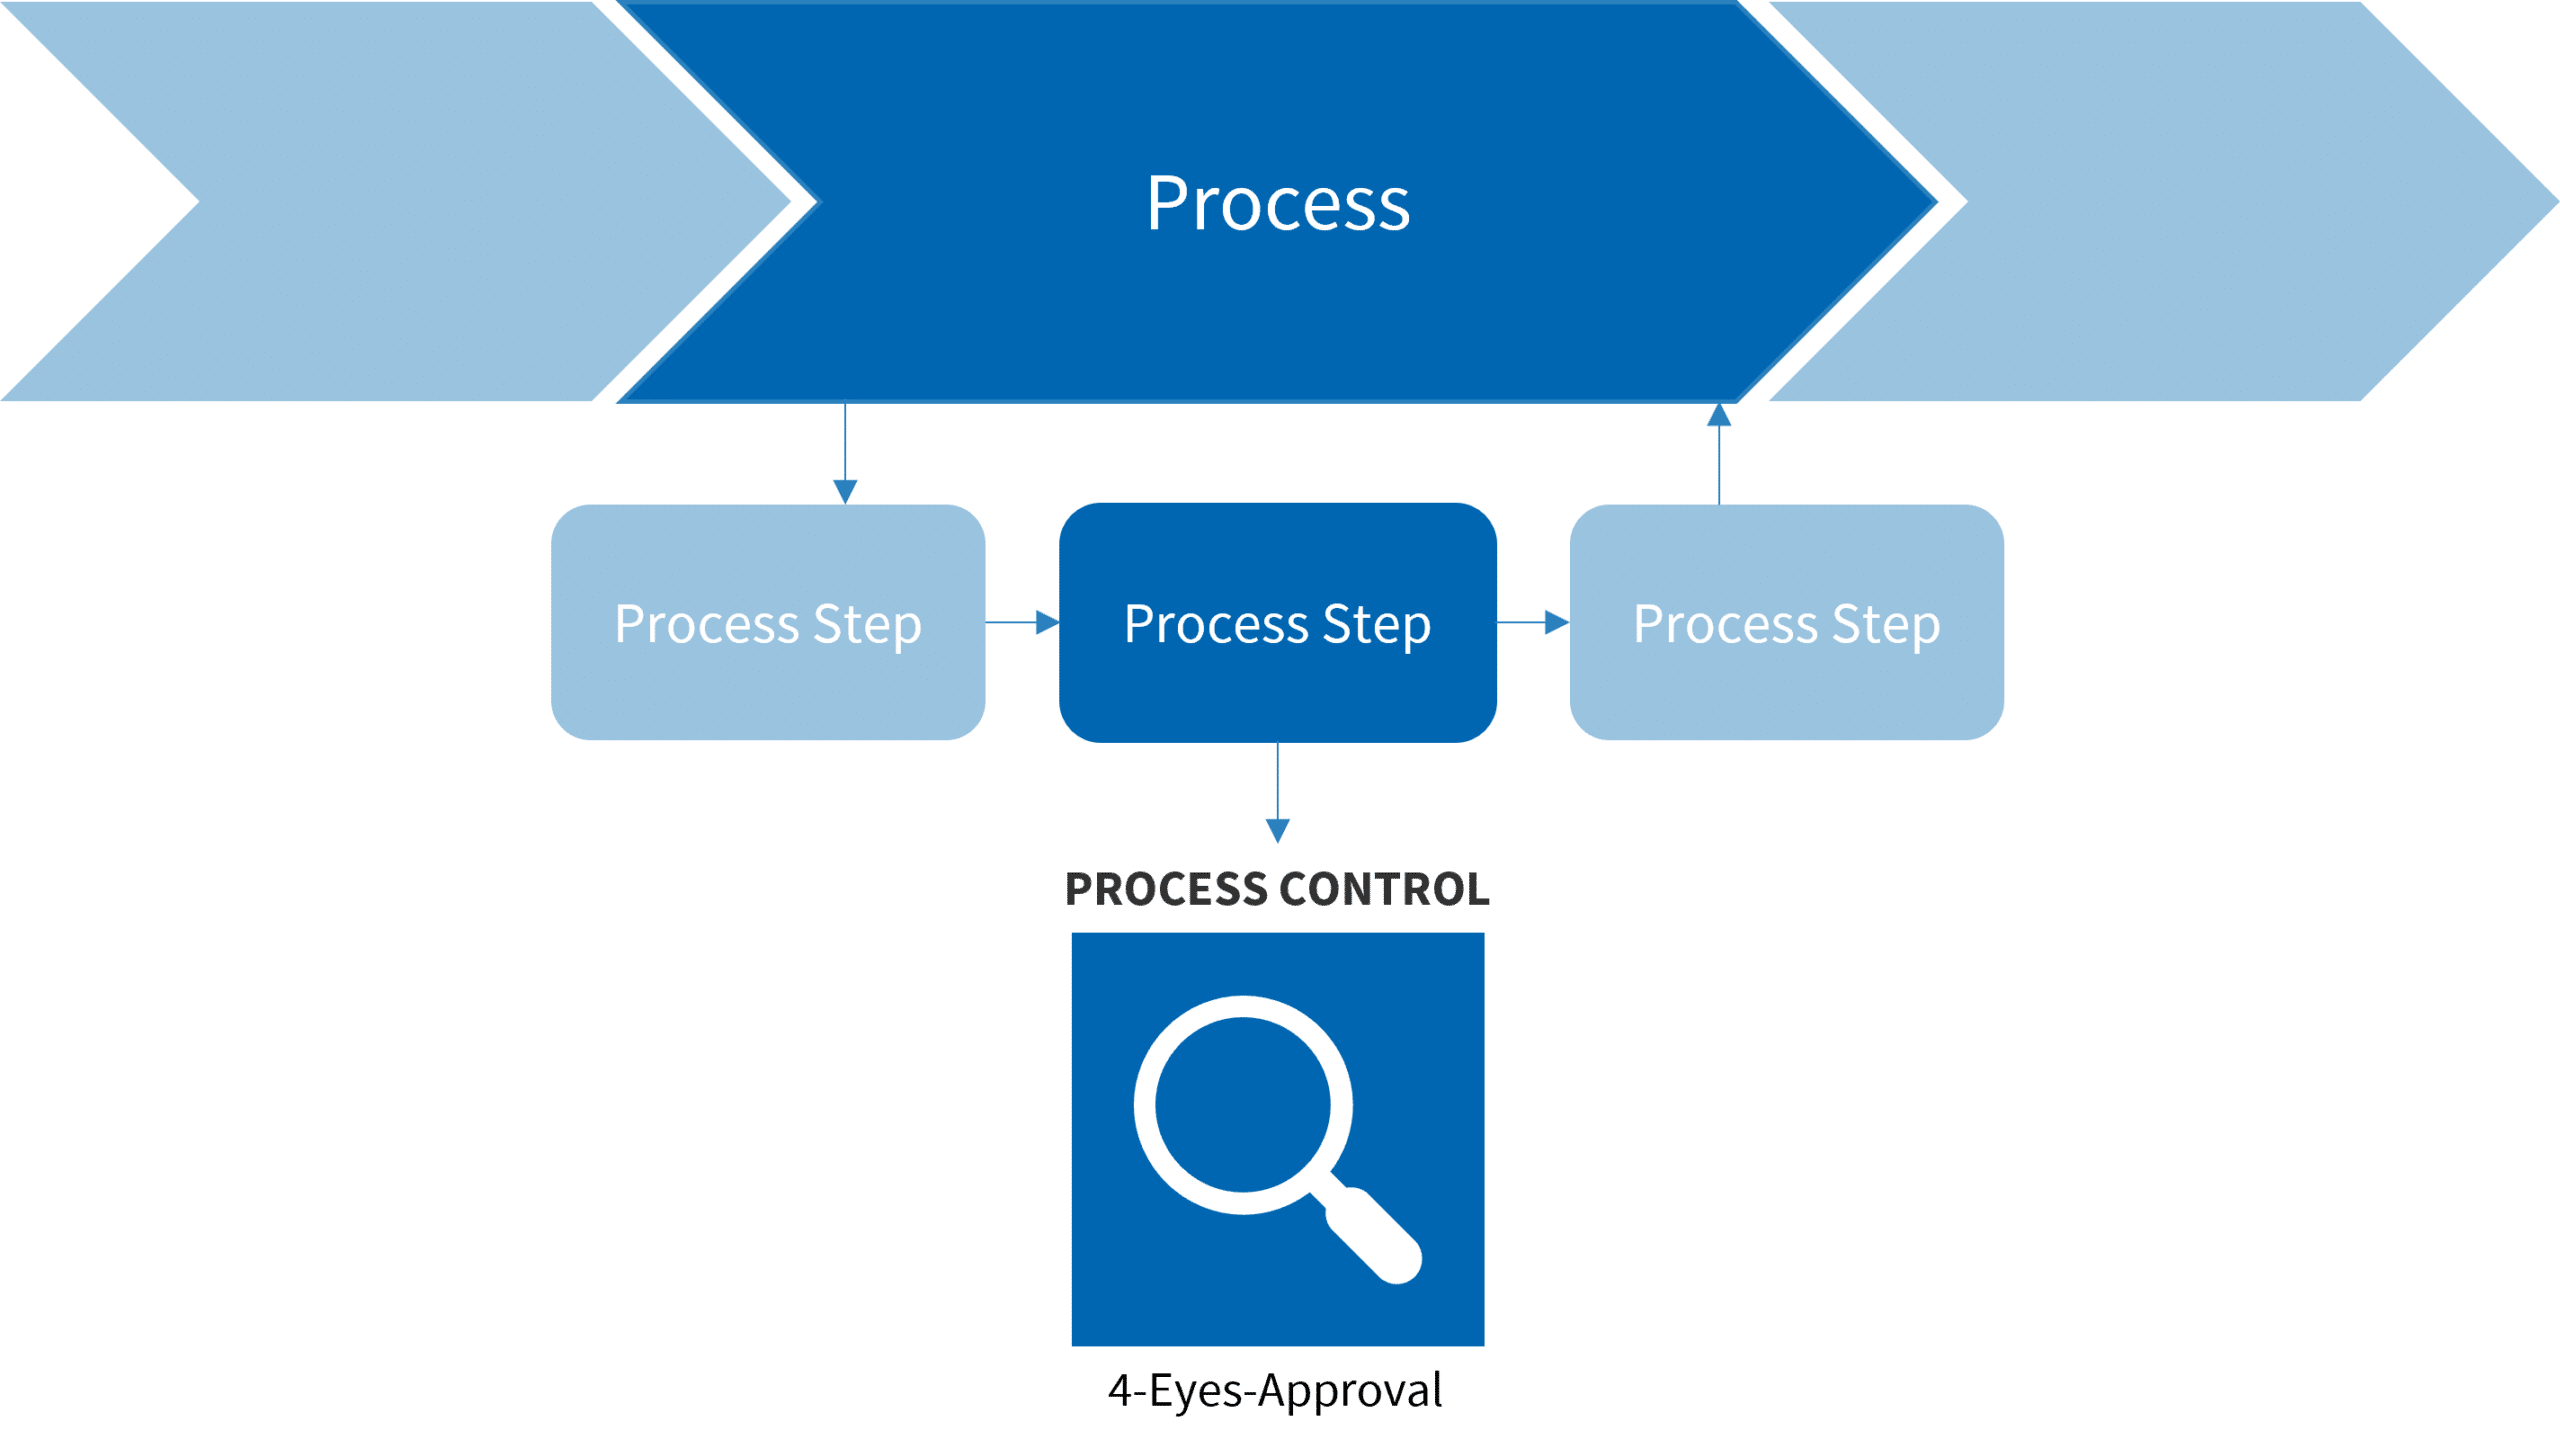 Image 1: Operational controls to ensure process steps are carried out